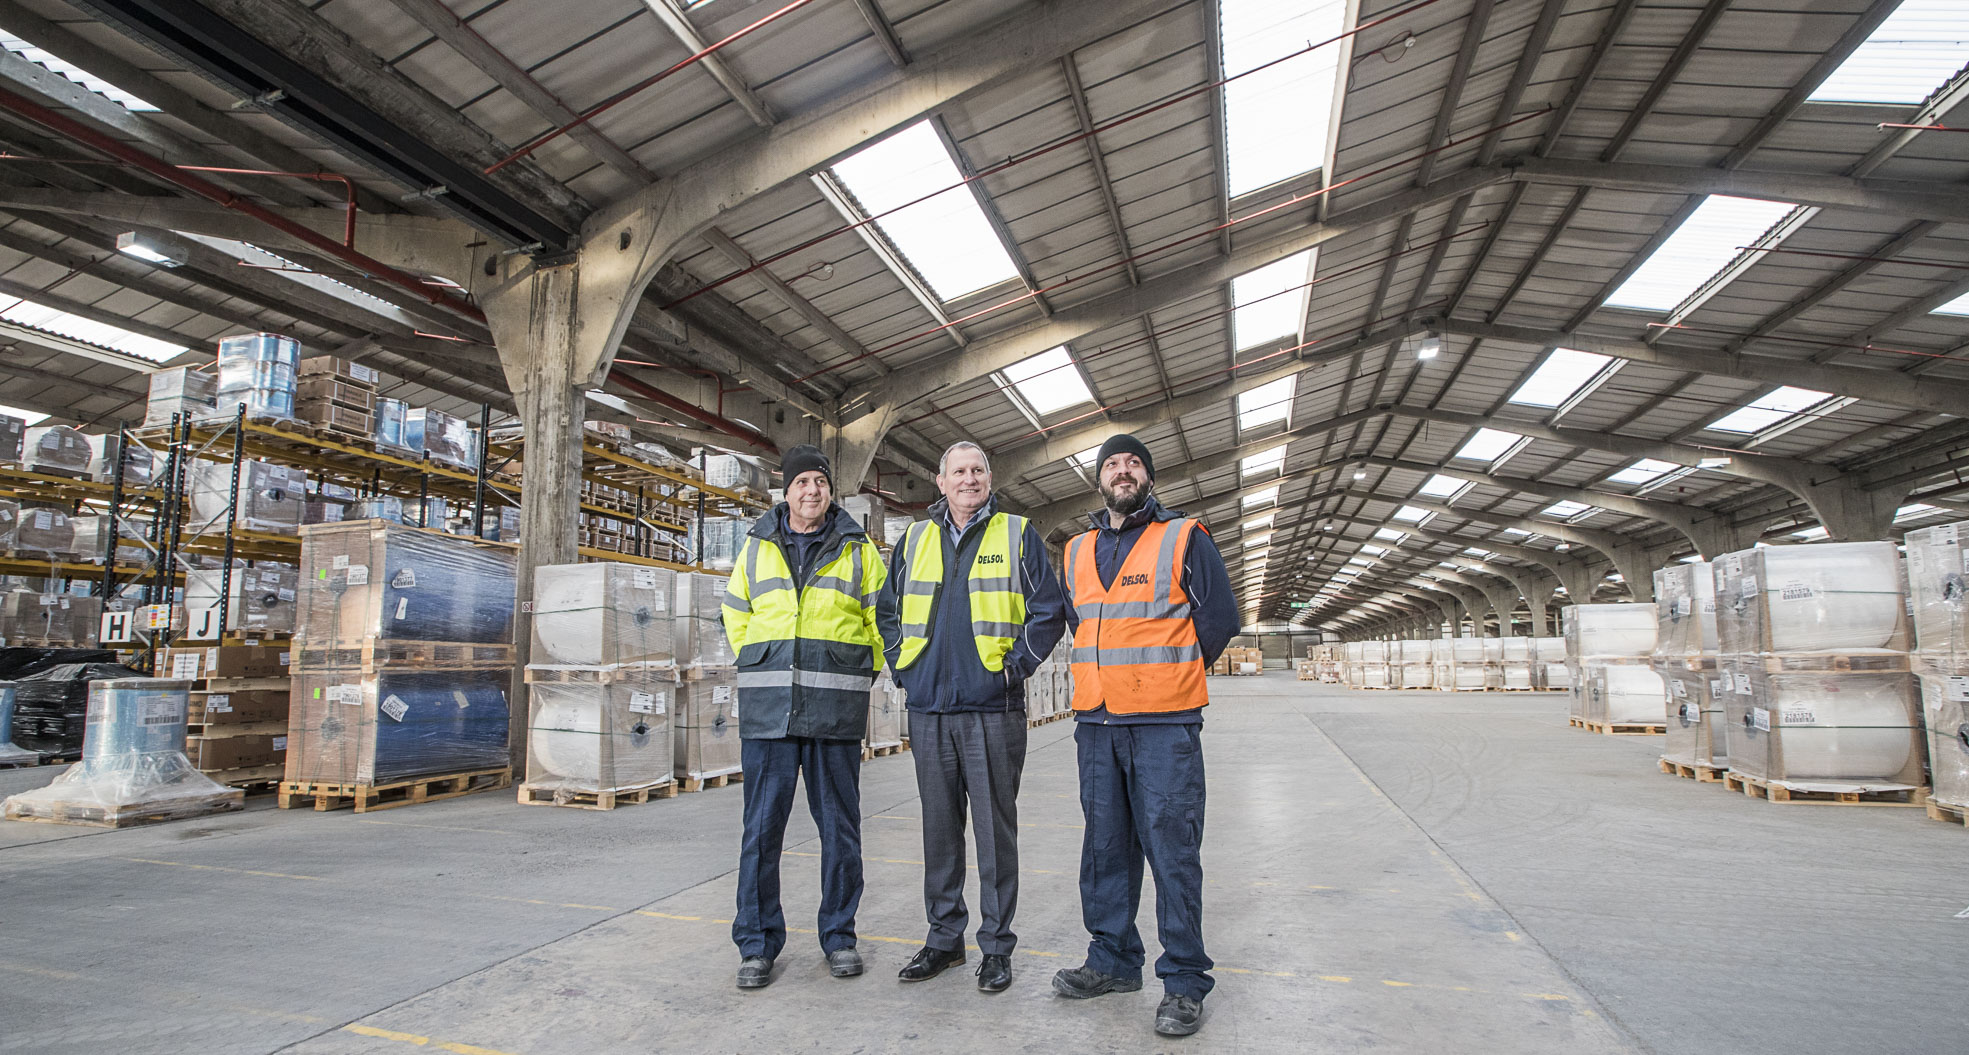 Massive warehouse helps Delsol deliver new services for customers 